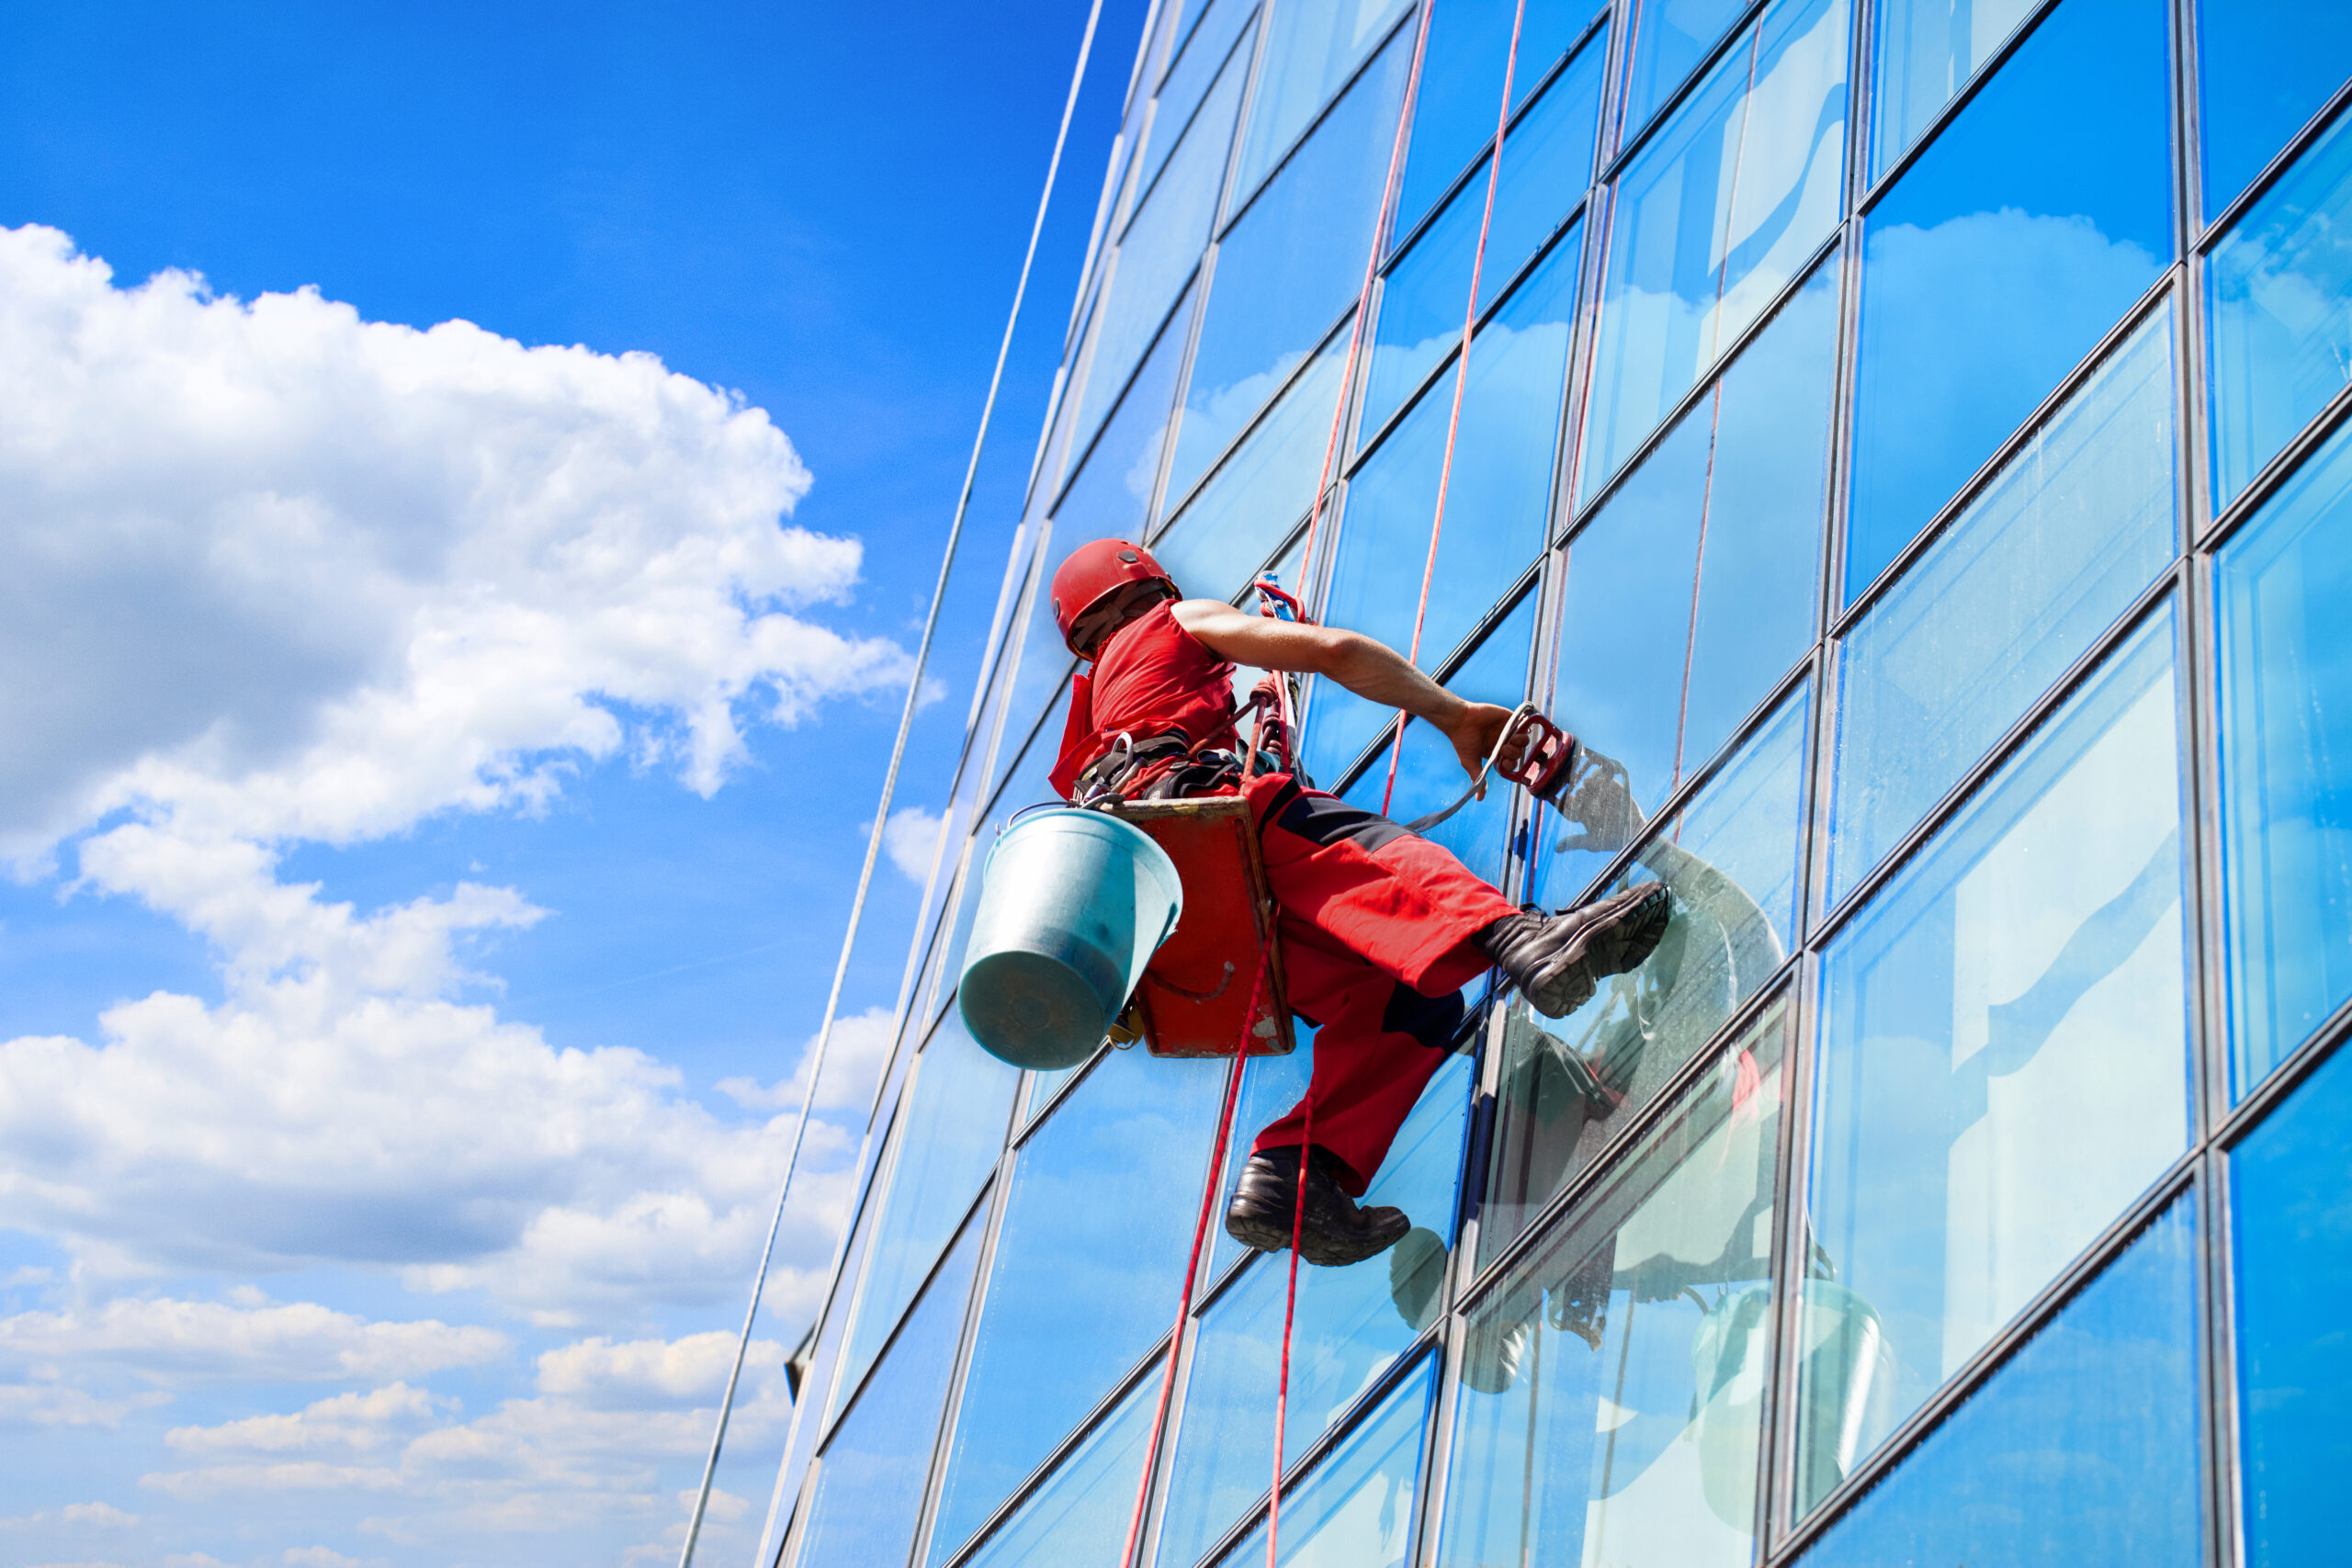 How To Price Window Cleaning Jobs (Residential & Commercial)